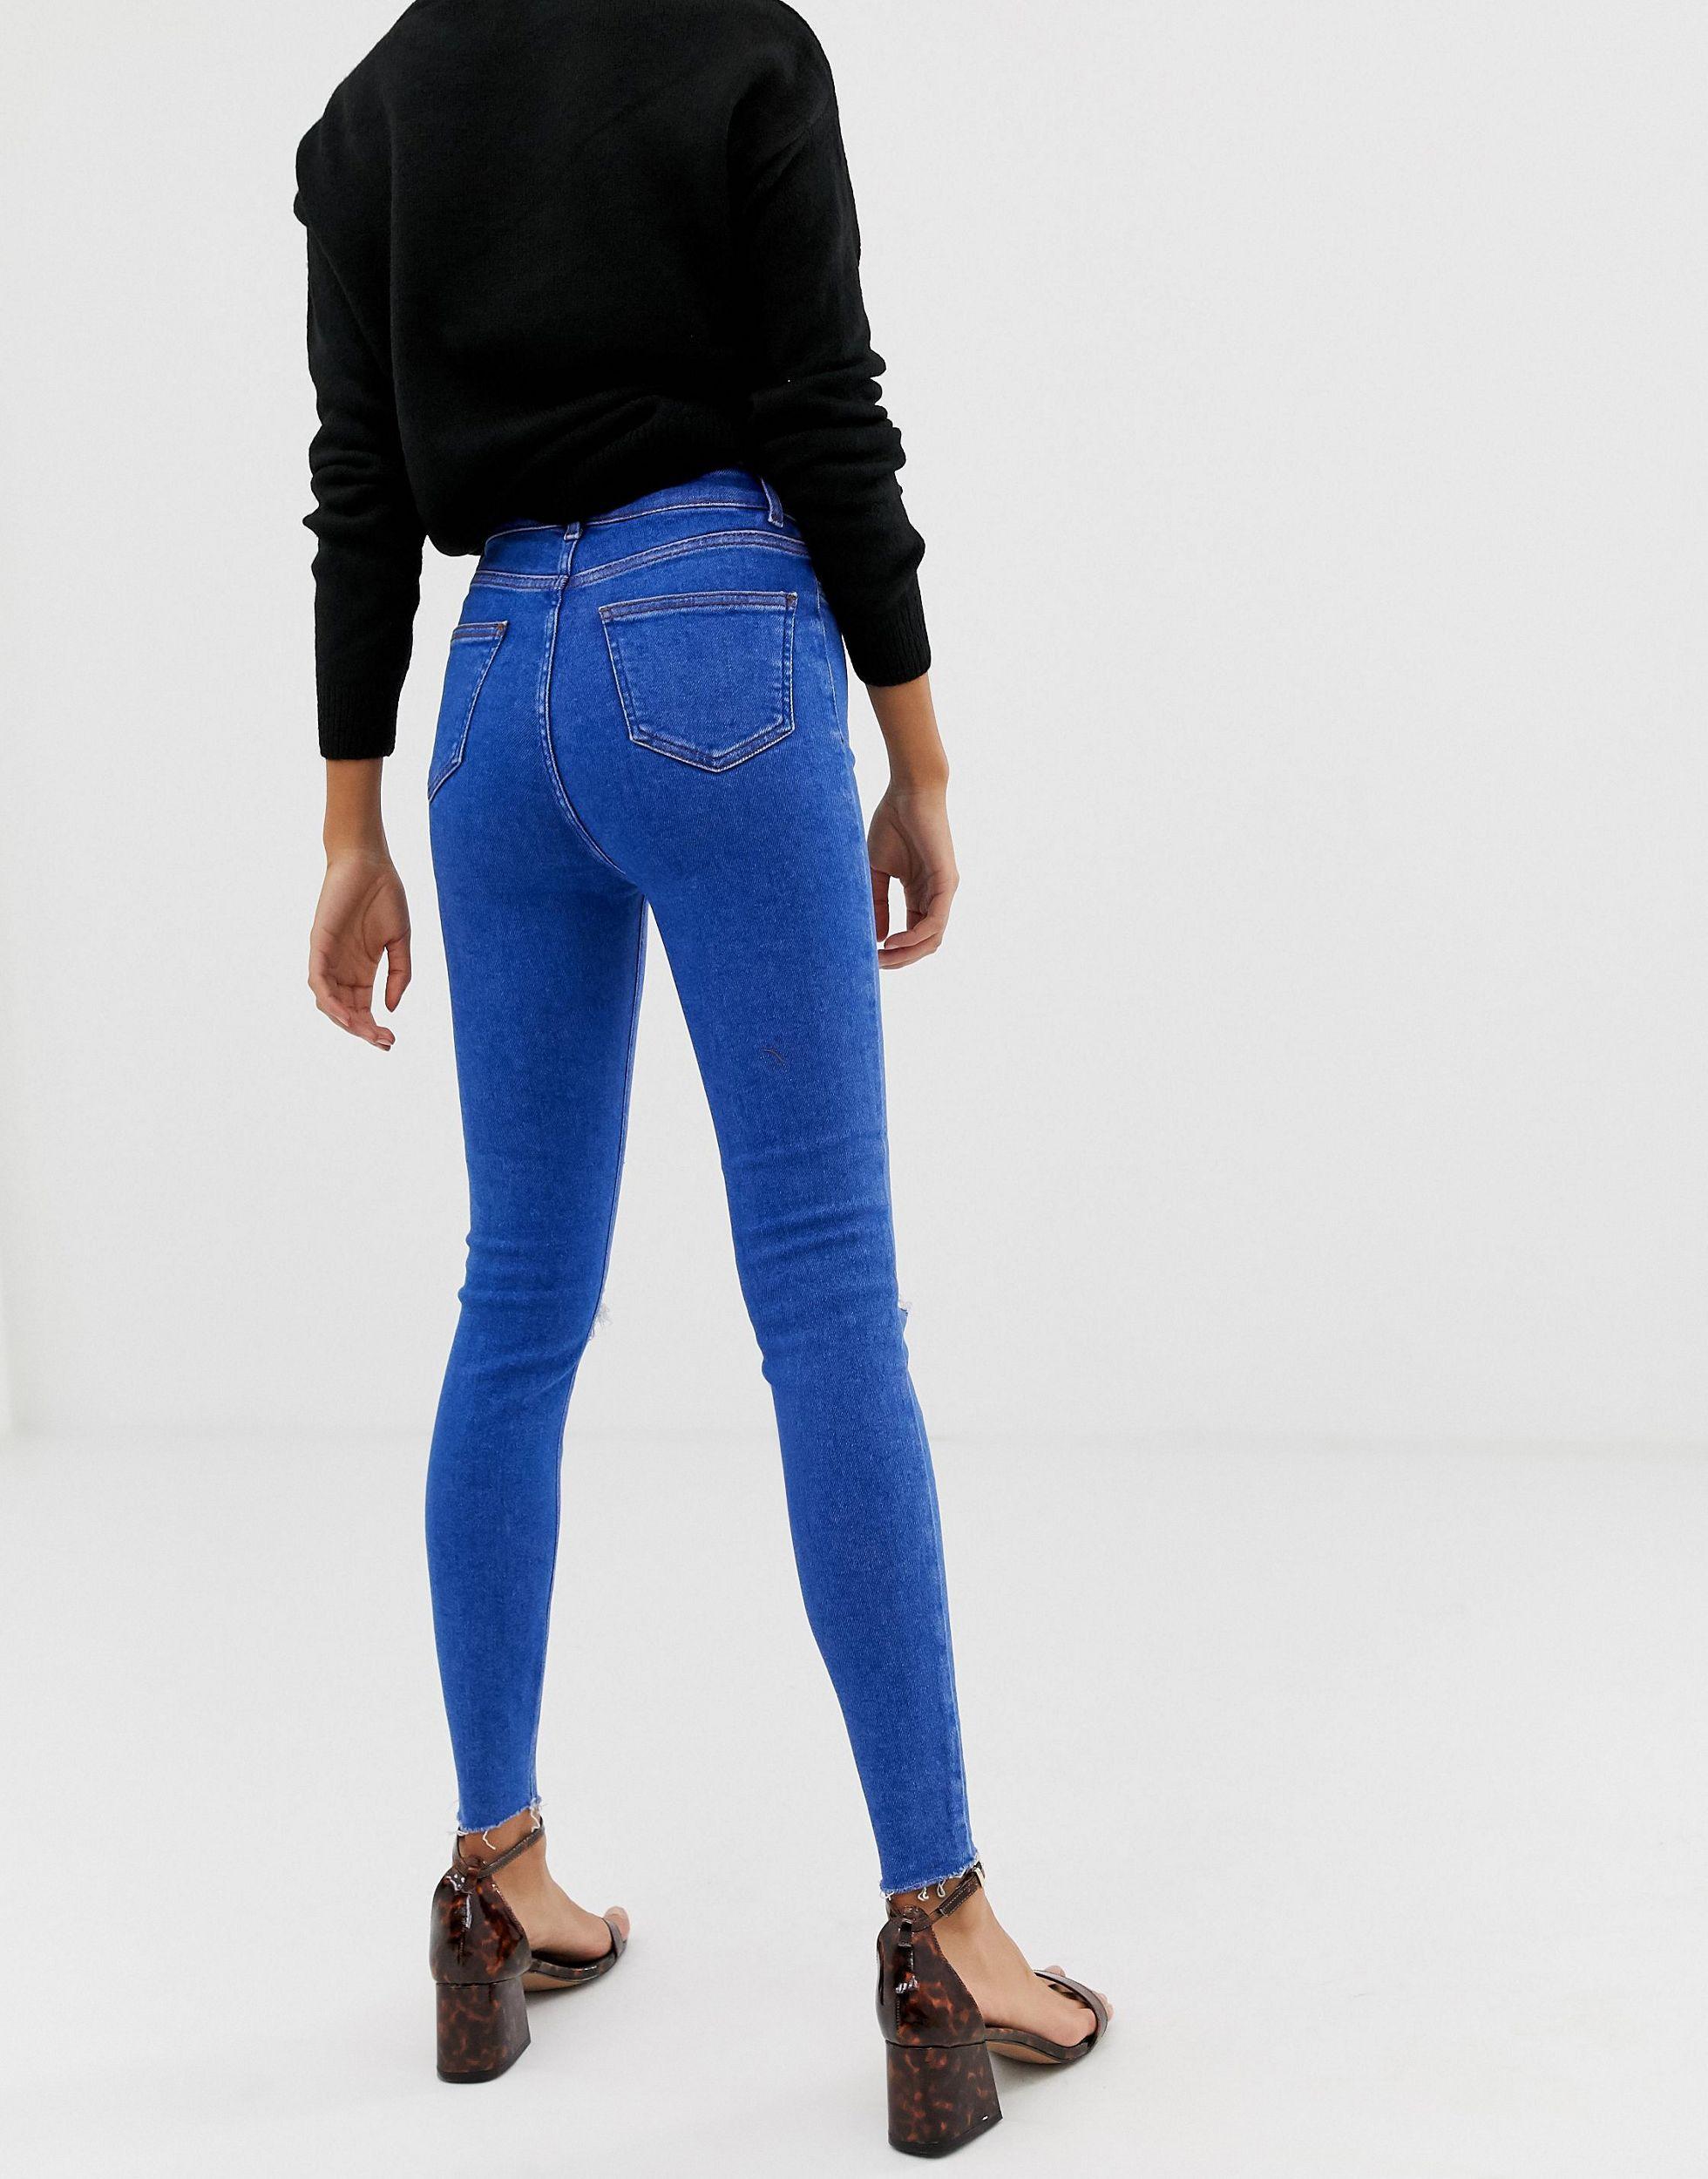 New Look Hallie Disco High Rise Ripped Jeans in Blue - Lyst